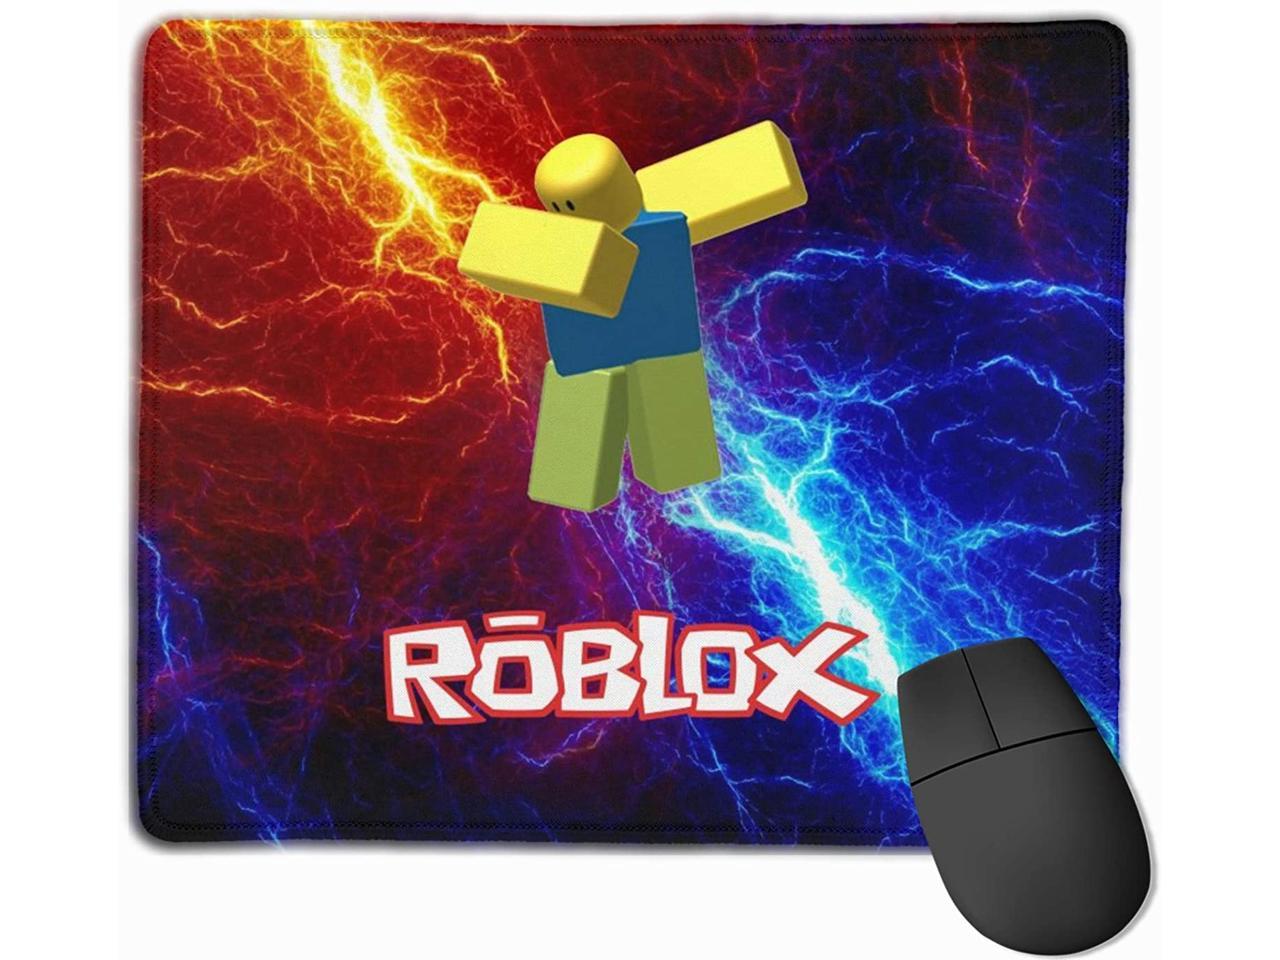 Ro Bl Ox Computer Mouse Pad With Non Slip Waterproof Rubber Mousepad For Computers Laptop Office Home Gaming Mouse Pads For Kids Teens Adults 10x12 Newegg Com - roblox ro office